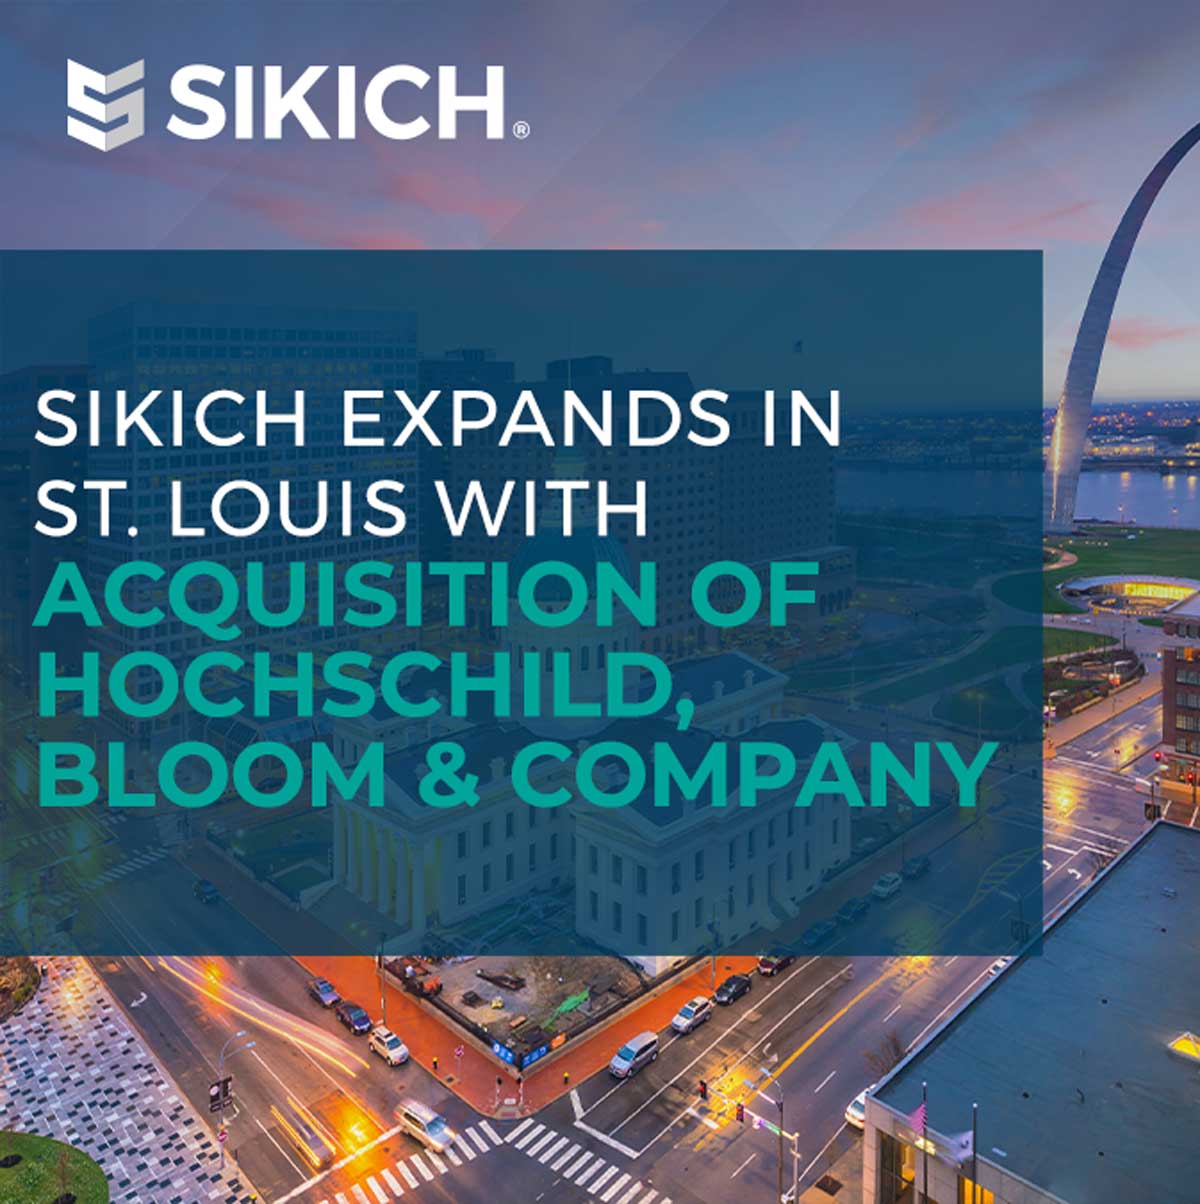 graphic with image of St. Louis and text that reads Sikich expands in St Louis with acquisition of Hochschild Bloom and Company